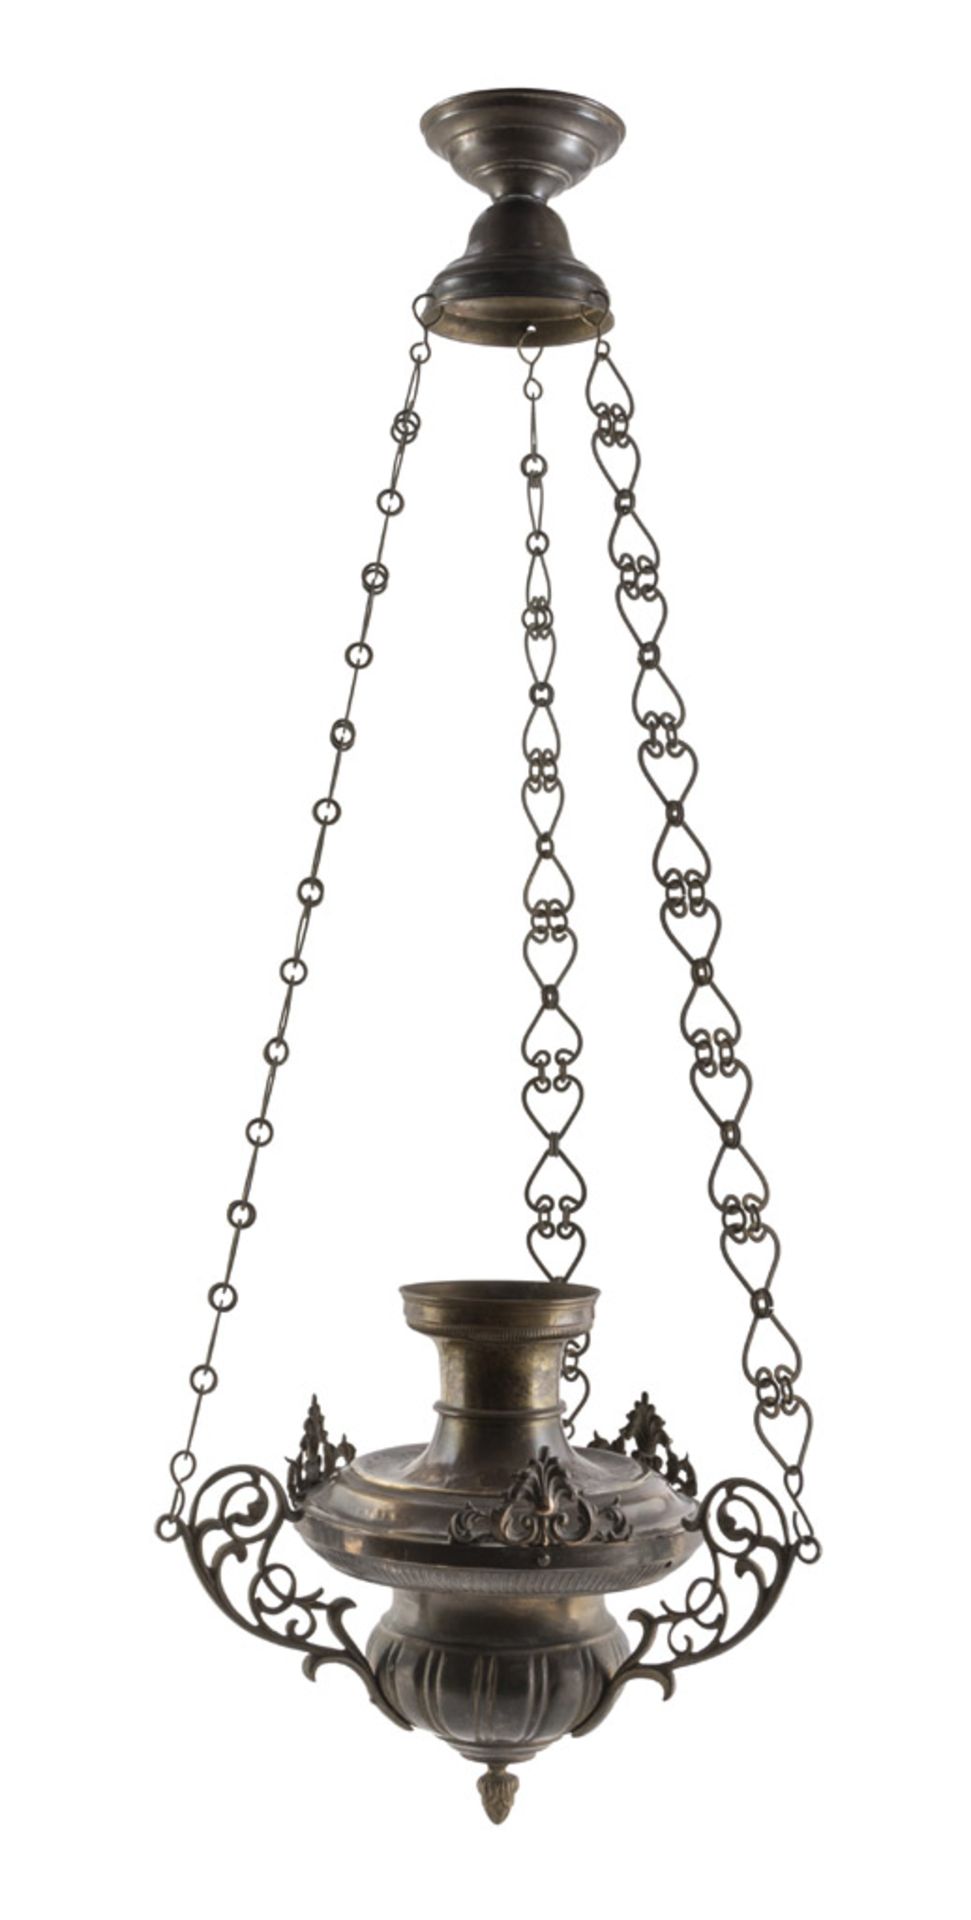 CENSER IN COPPER, LATE 18TH CENTURY fluted body, complete of chain. Measures cm. 29 x 25. TURIBOLO